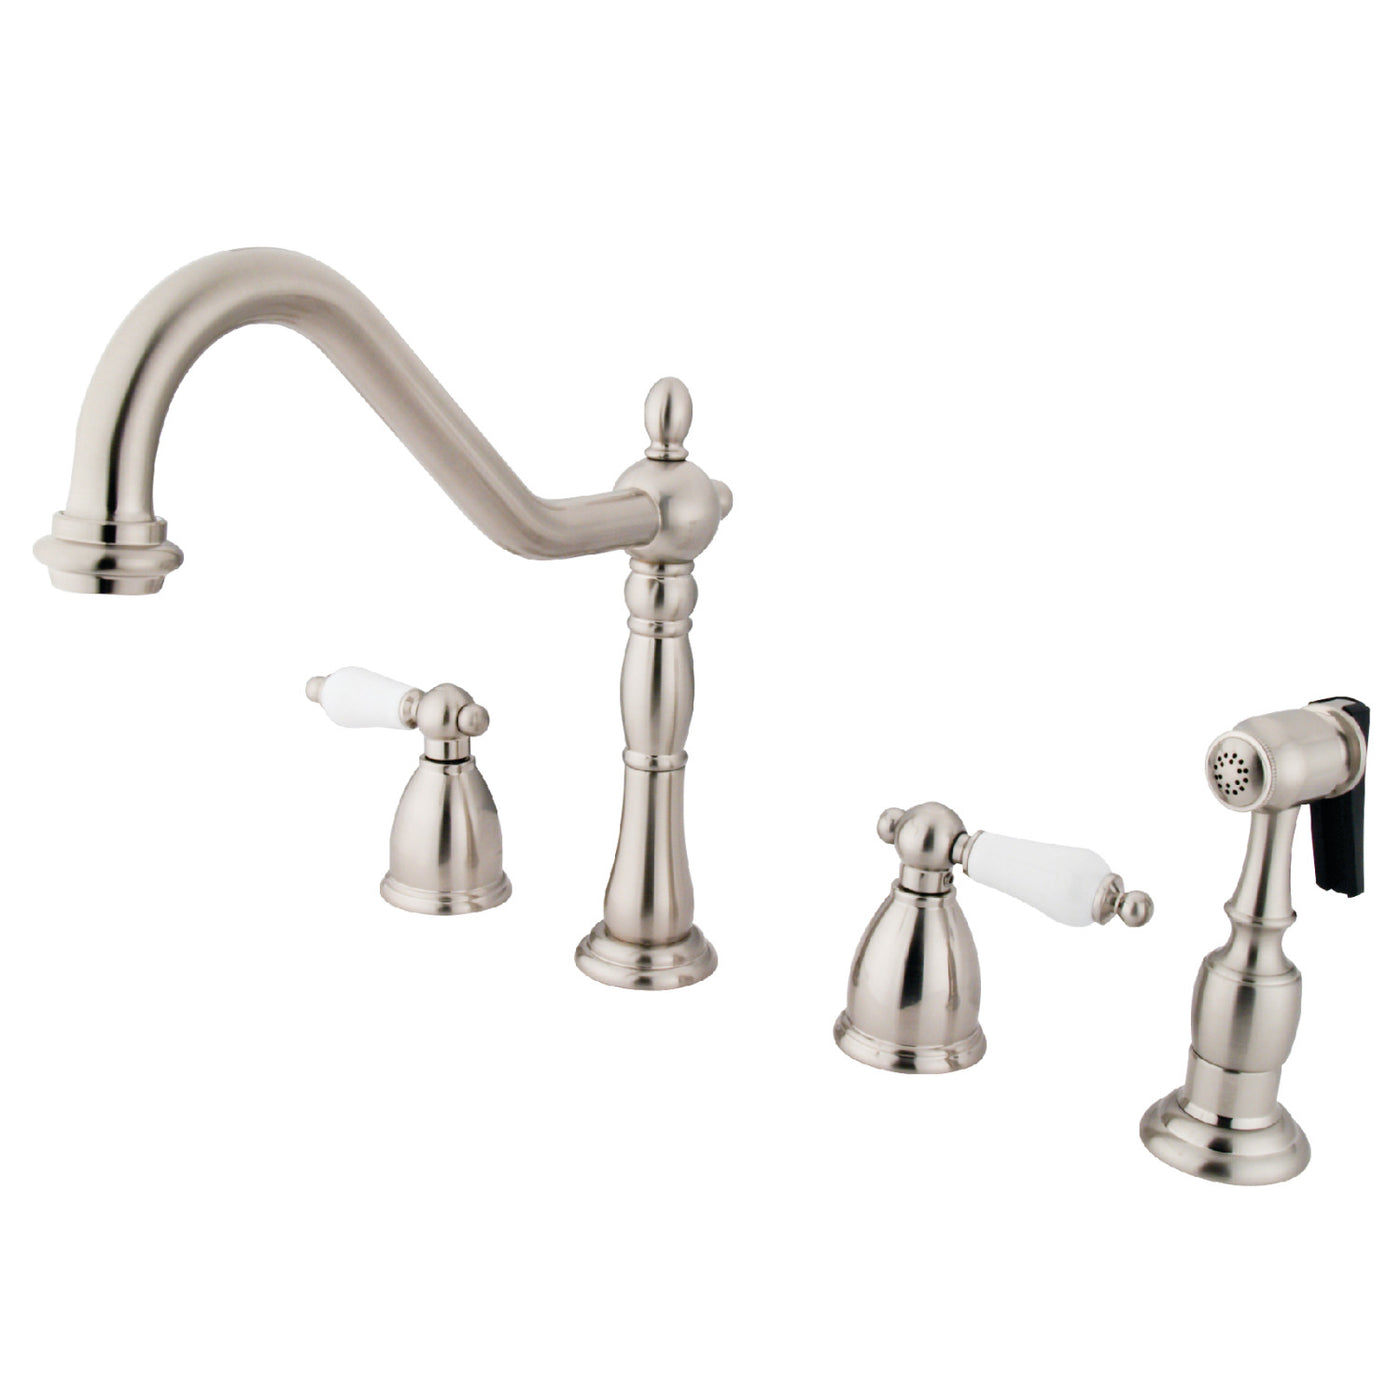 Elements of Design EB1798PLBS Widespread Kitchen Faucet with Brass Sprayer, Brushed Nickel